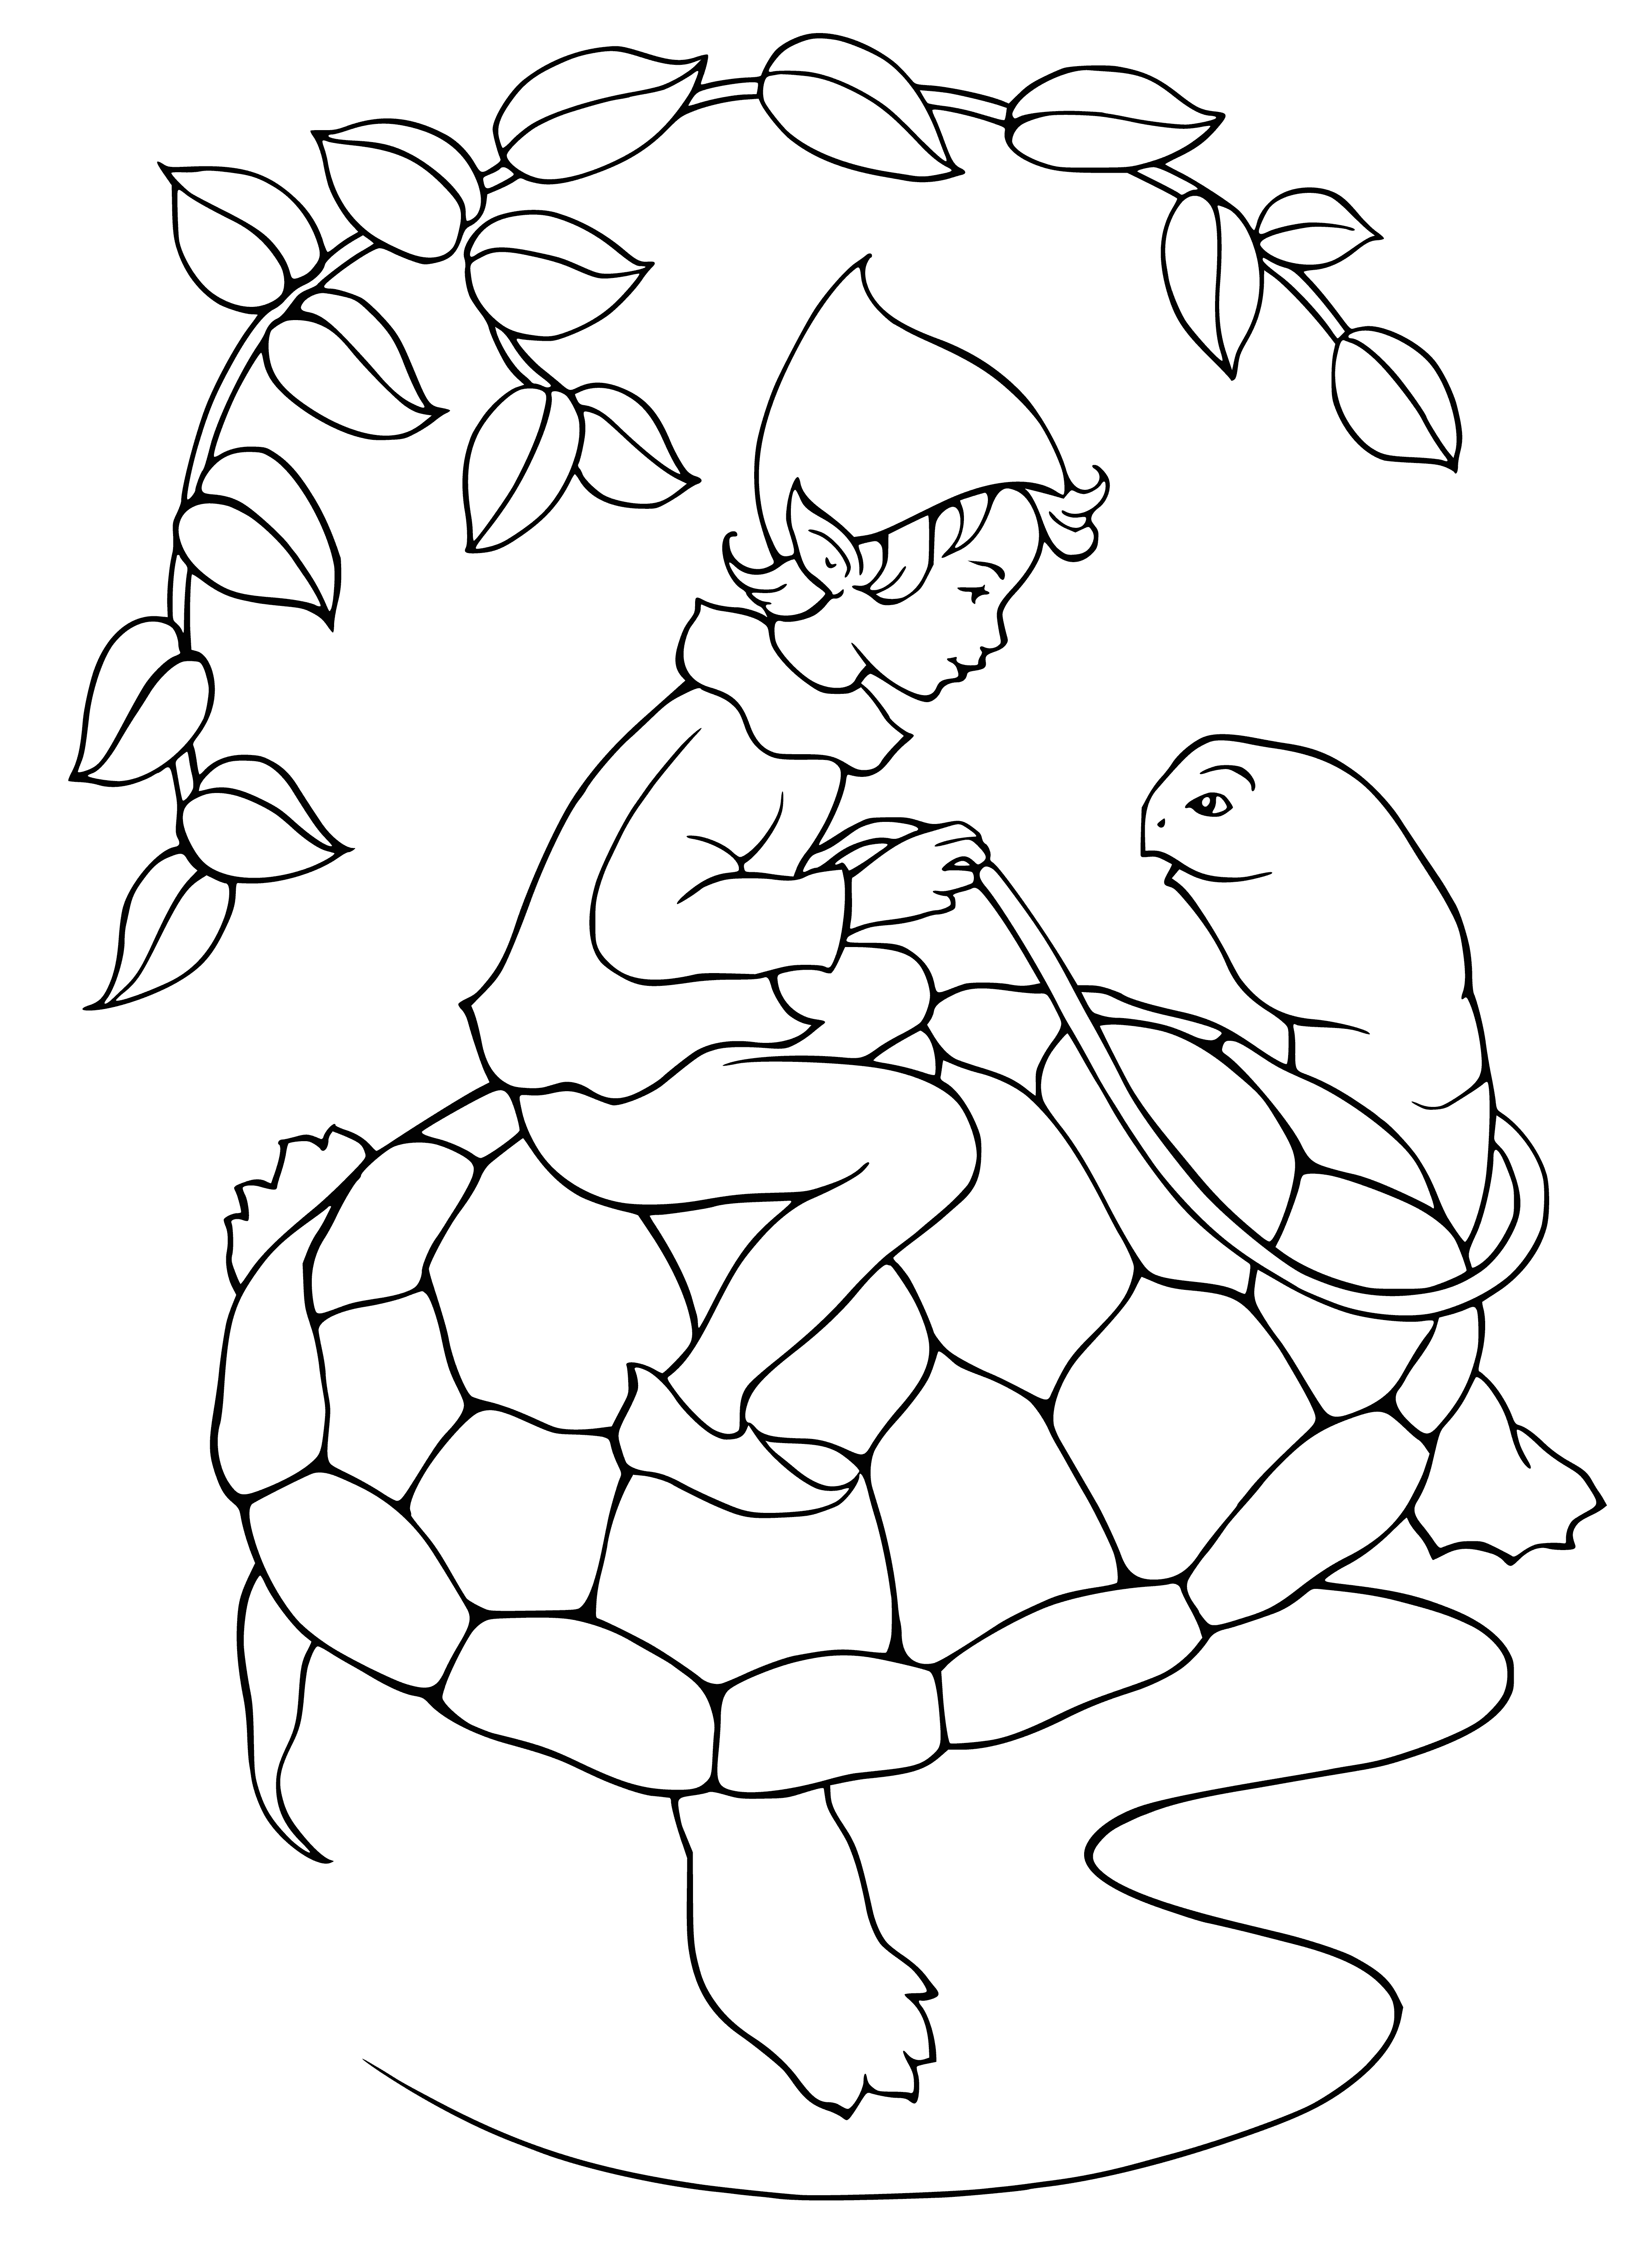 Elf boy riding a turtle coloring page